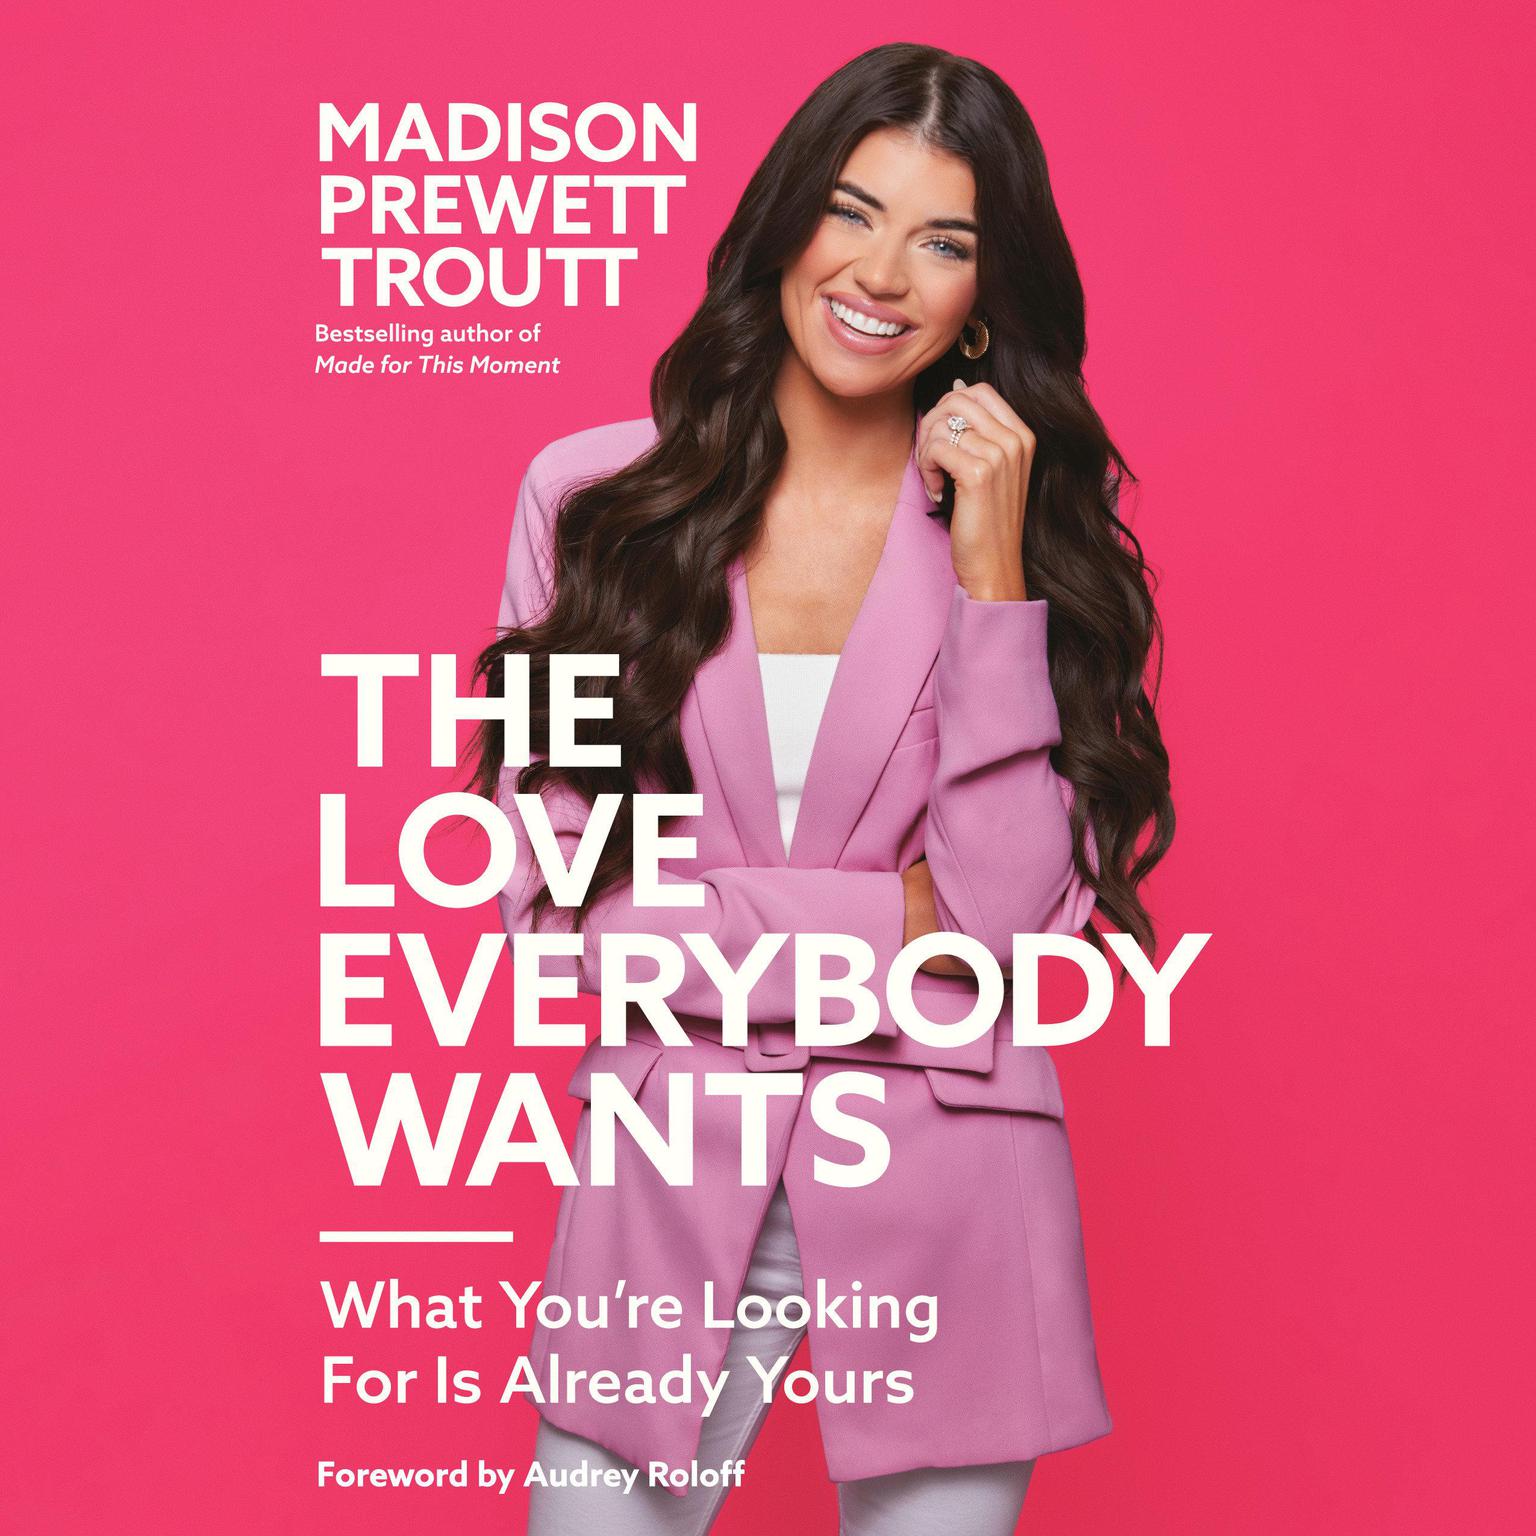 The Love Everybody Wants: What Youre Looking For Is Already Yours Audiobook, by Madison Prewett Troutt